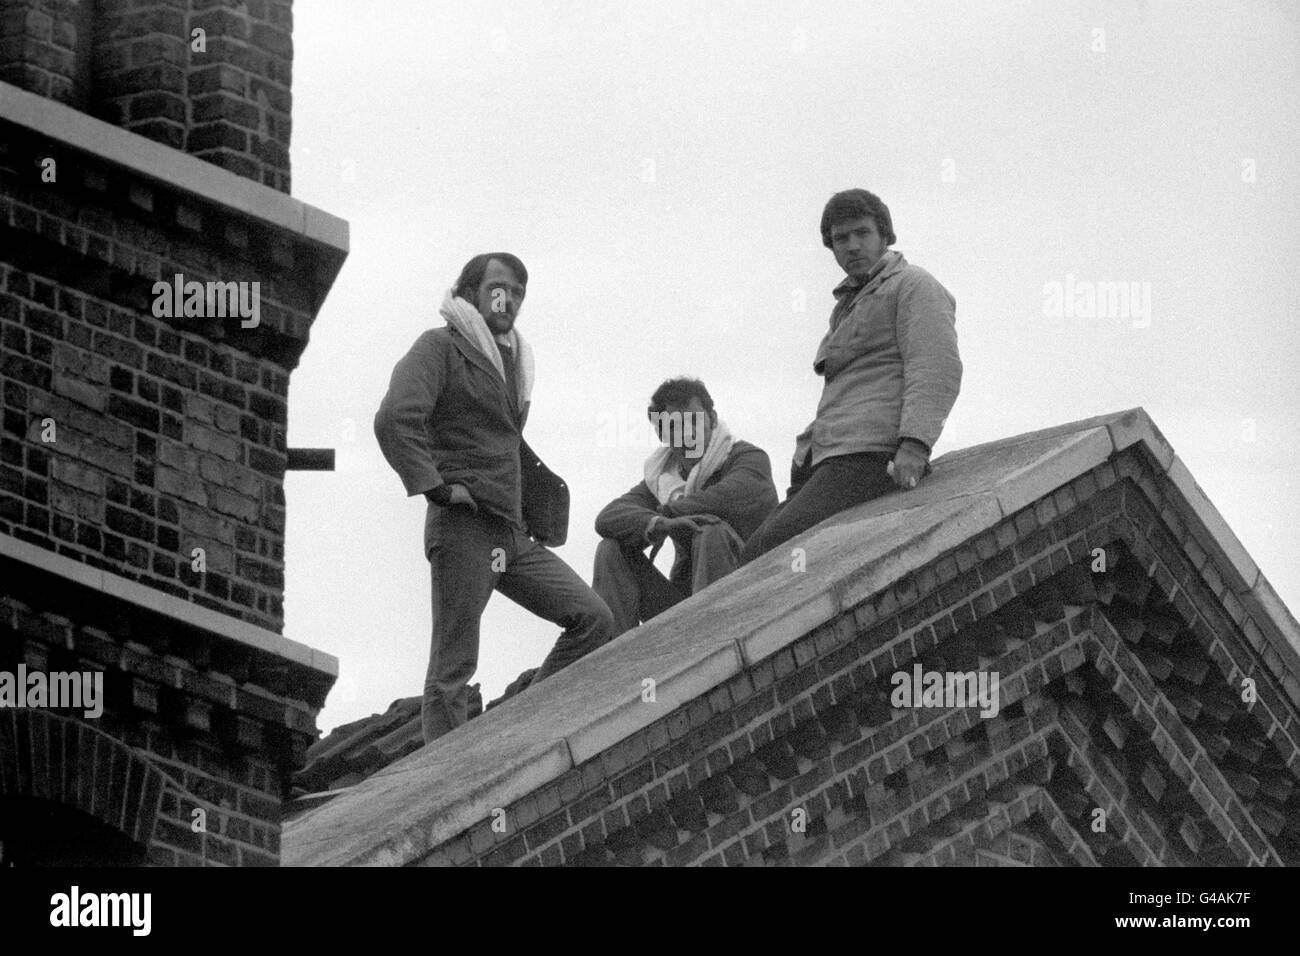 Three prisoners, Robert Walsh, Stephen Blake and Martin Coughlan, stand on the roof of 'D' Block at Wormwood Scrubs Prison, London during a protest by the three inmates. They pelted prison officers with slates from the roof and waved the Irish tricolour flag, demanding 'more humane prison visits.' Stock Photo